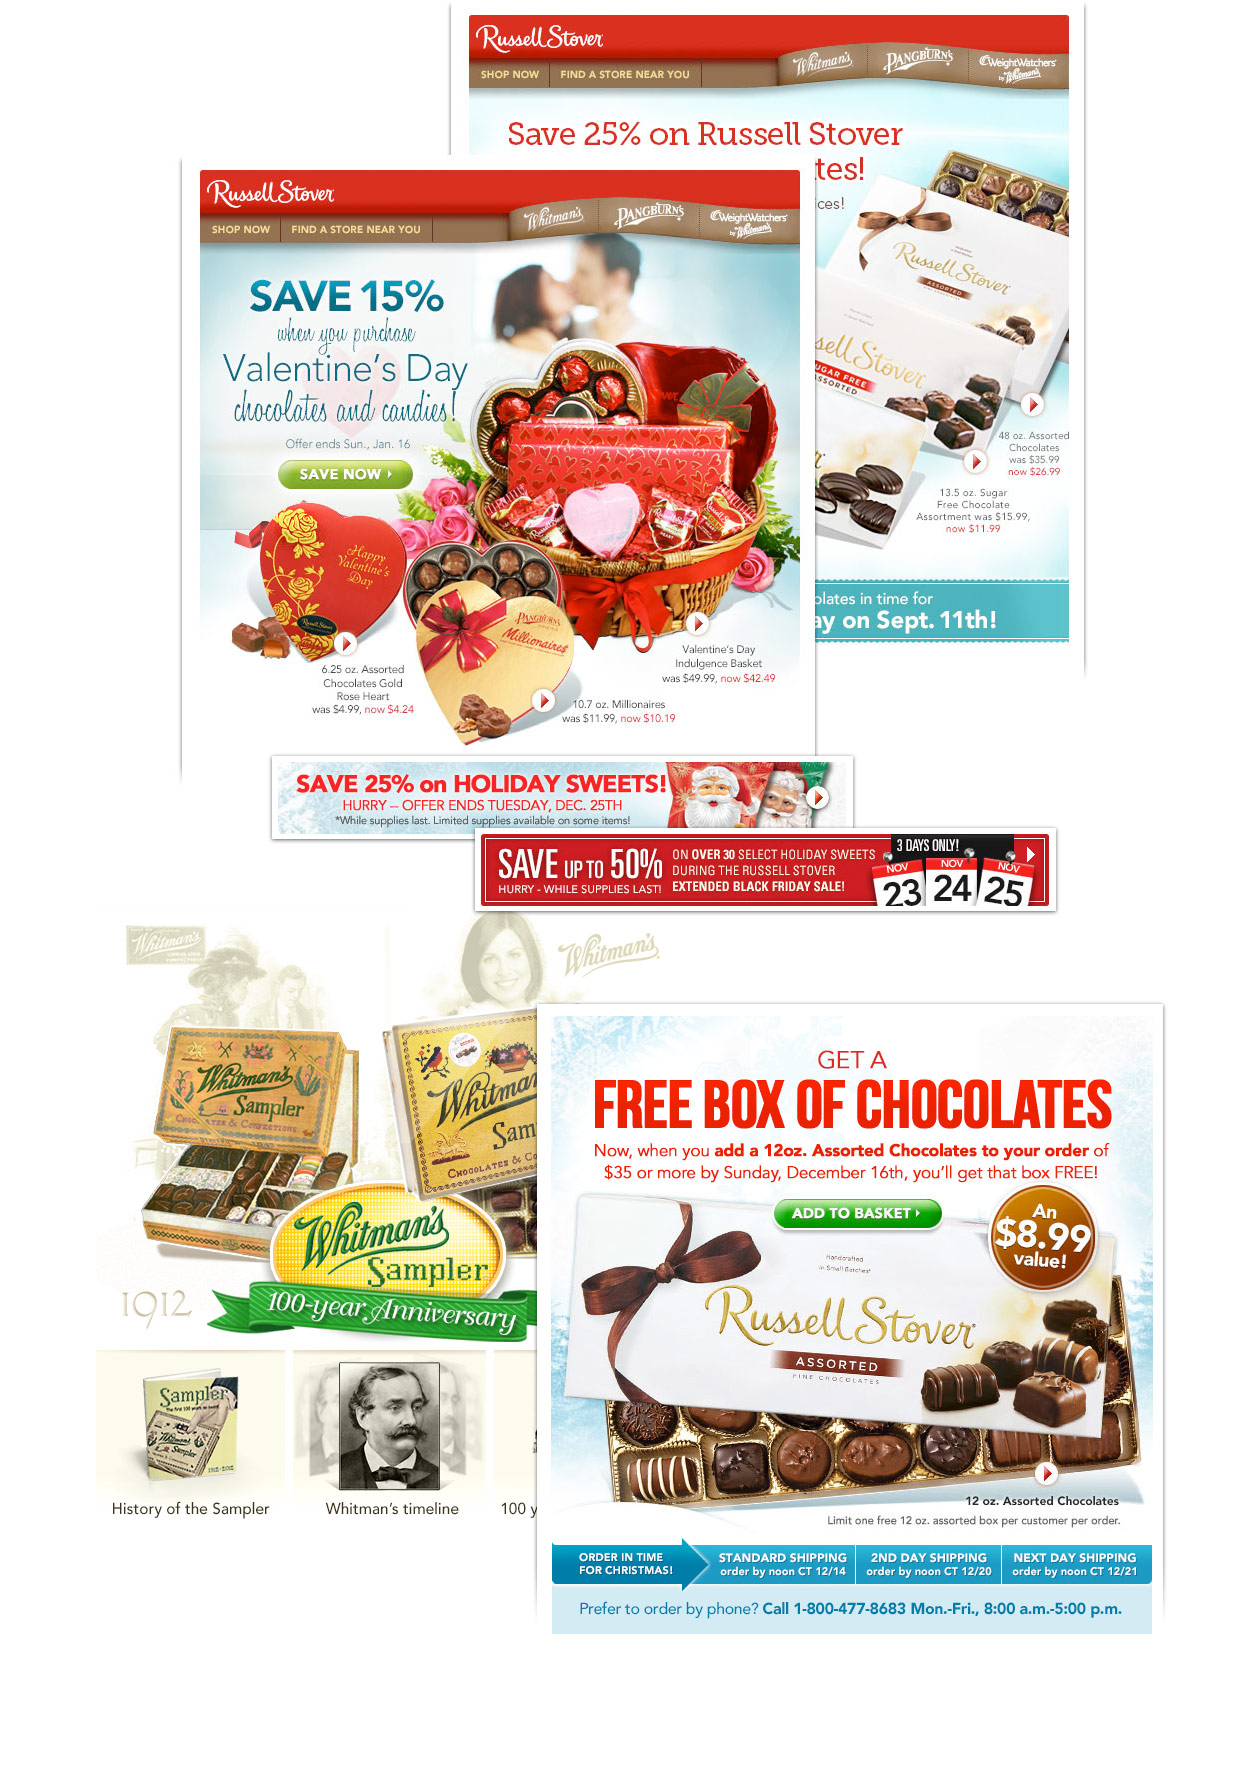 Russell Stover email and banner examples